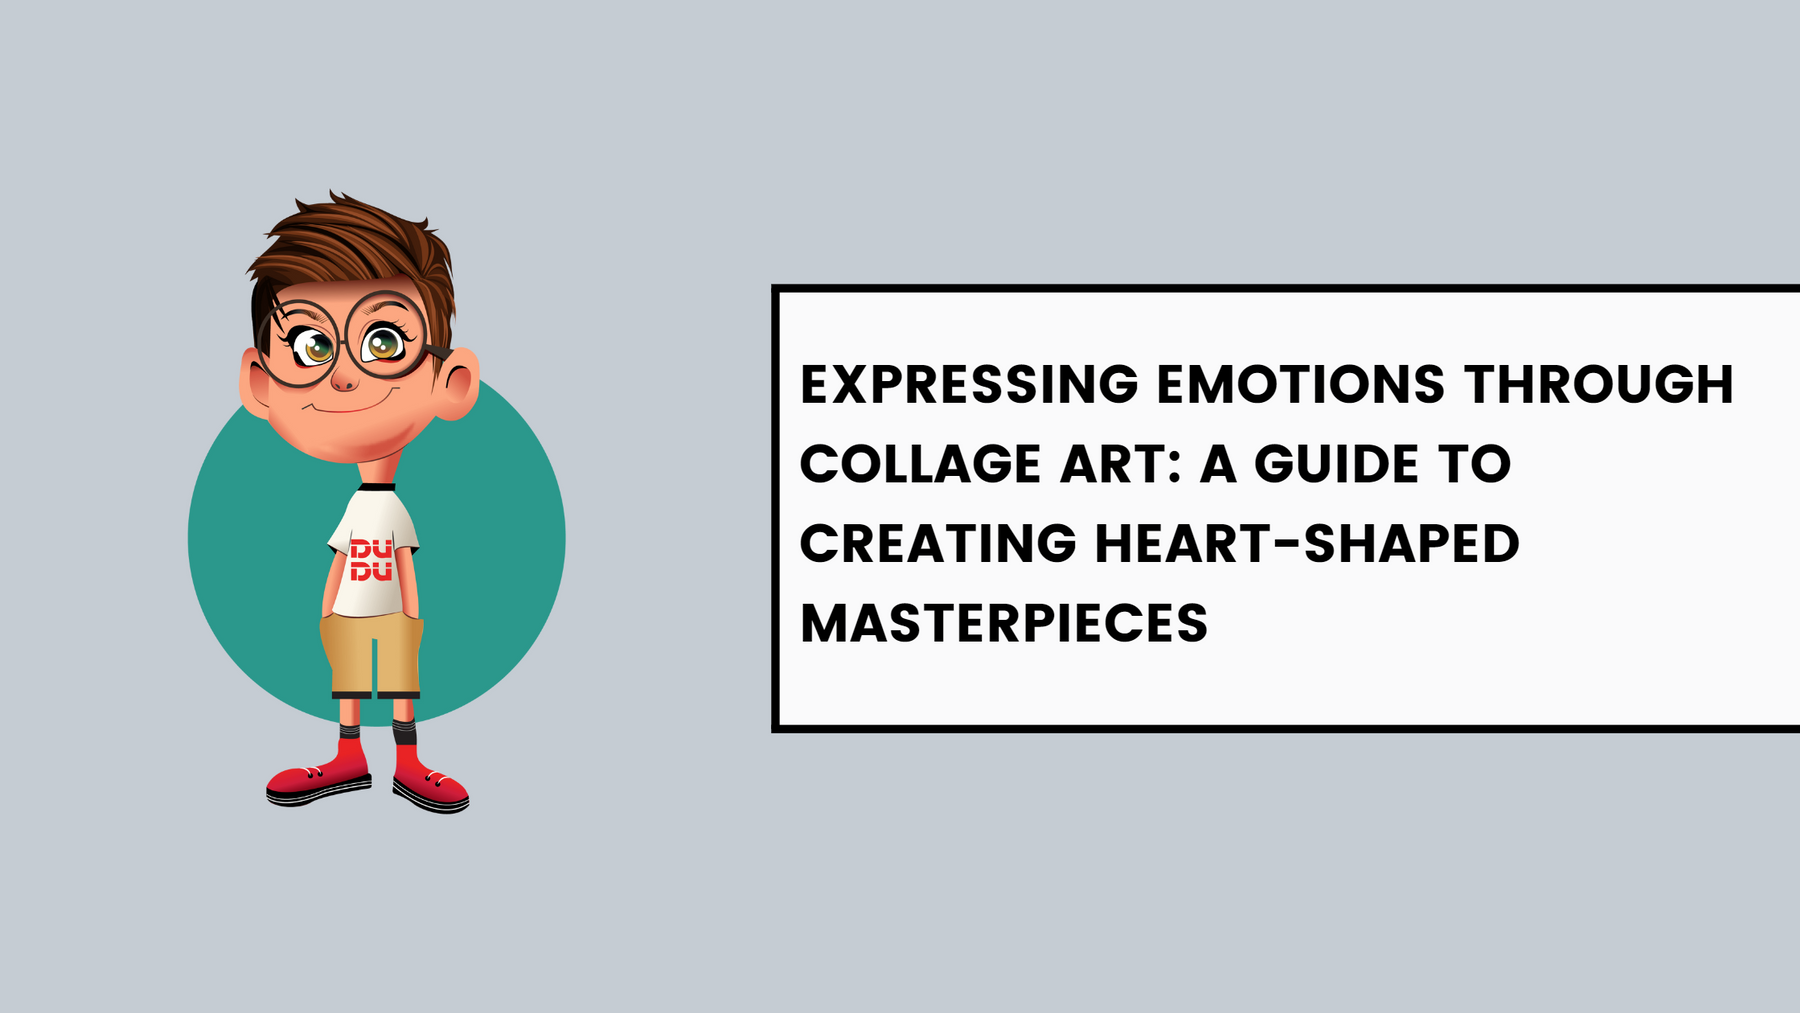 Expressing Emotions Through Collage Art: A Guide to Creating Heart-Shaped Masterpieces